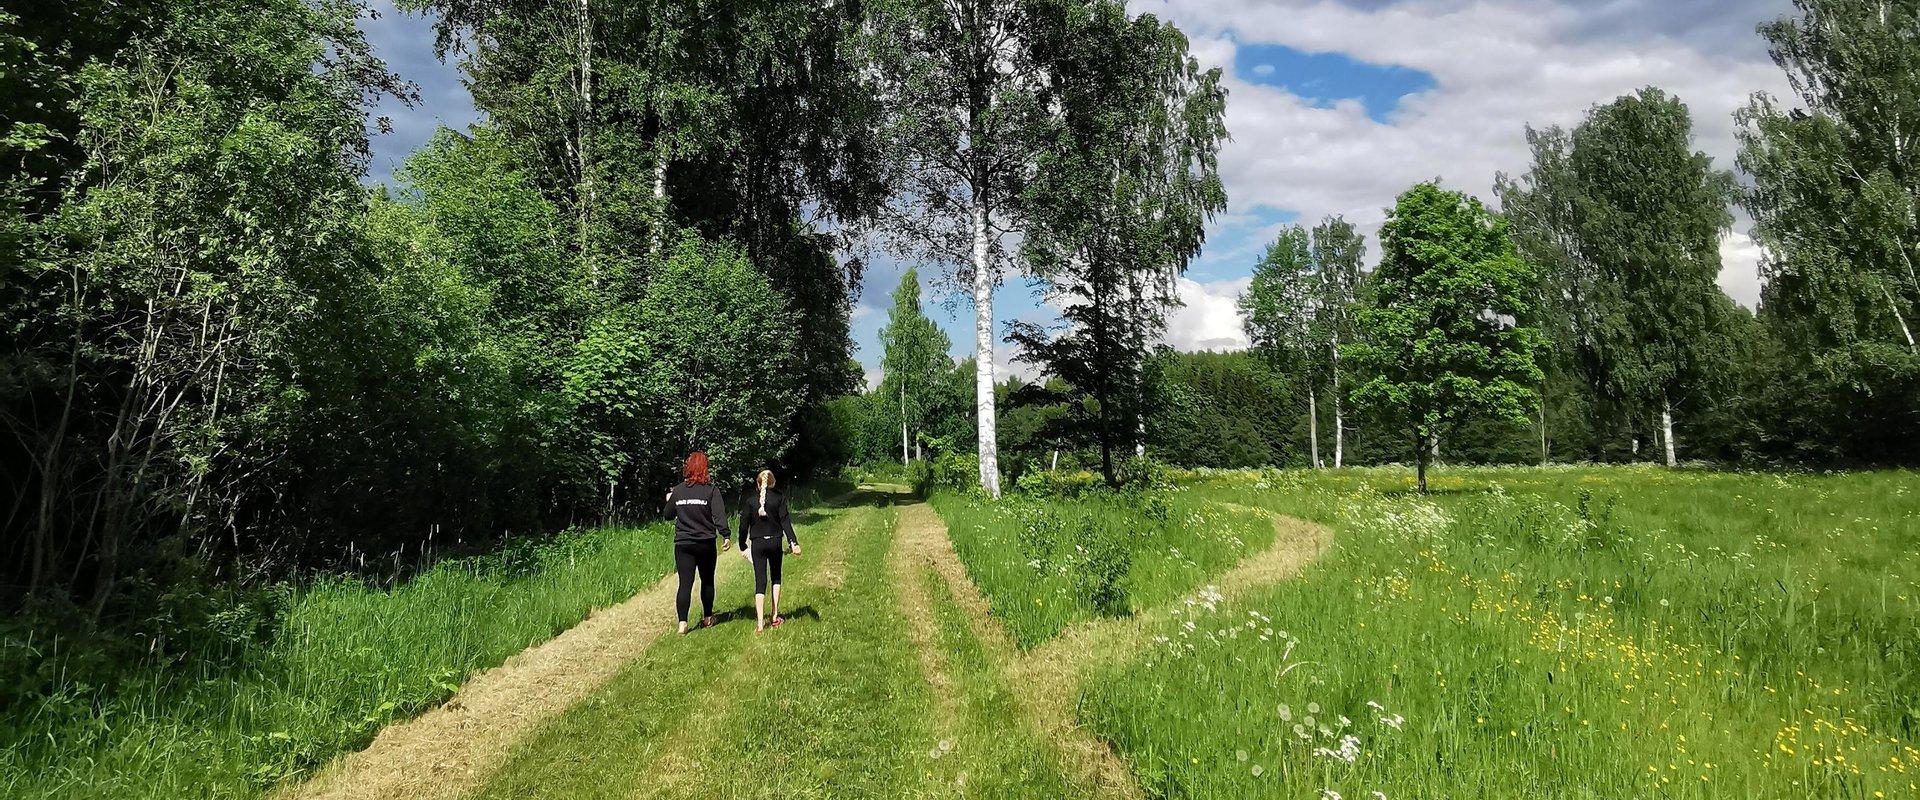 The Meiekose study trail winds along the banks of the Raudna and Tõramaa Rivers before reaching the meadows at the mouth of the Tõramaa River, which f